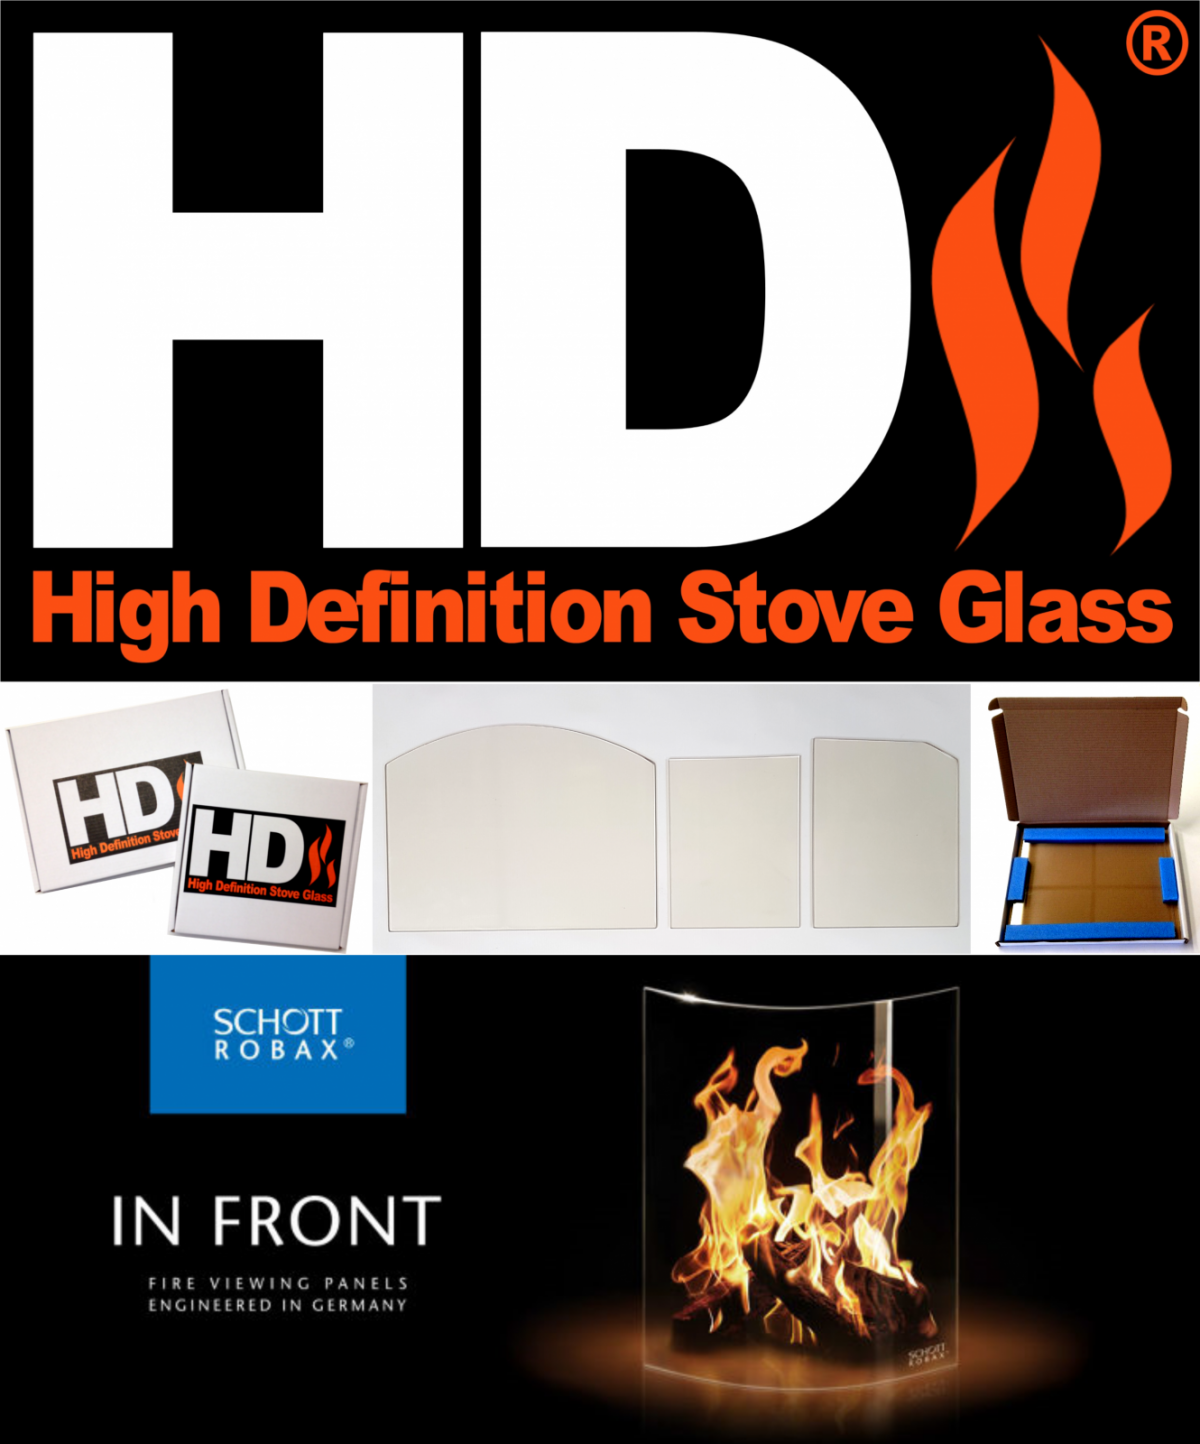 High Definition Stove Glass for the Esse 100 (2 Door Model)